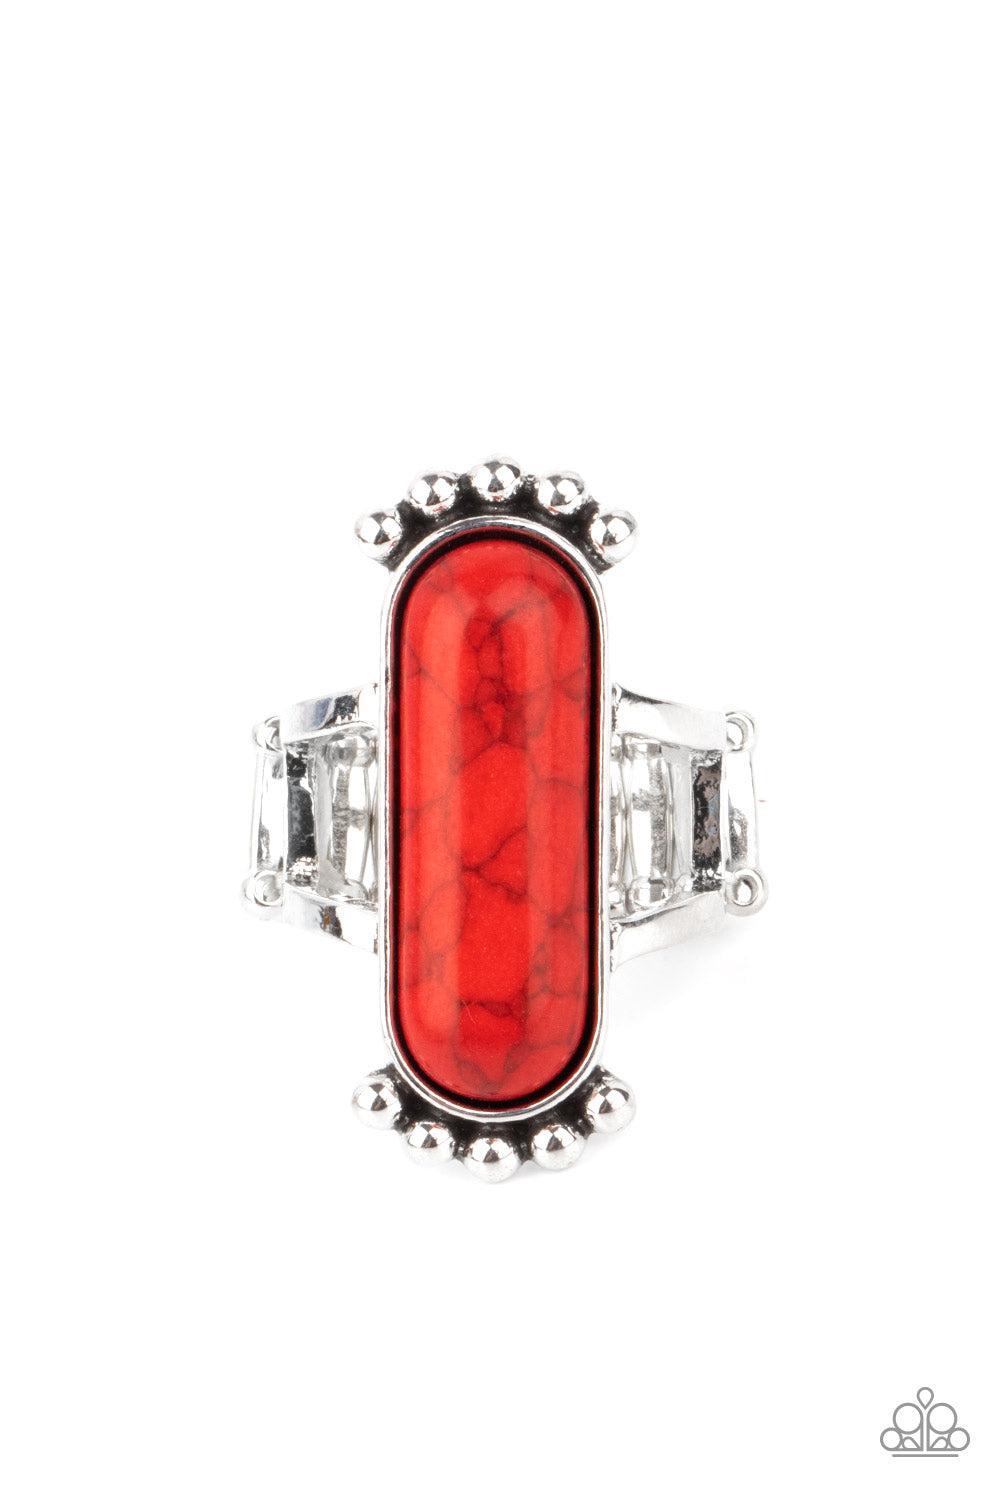 RANCH RELIC RED-RING